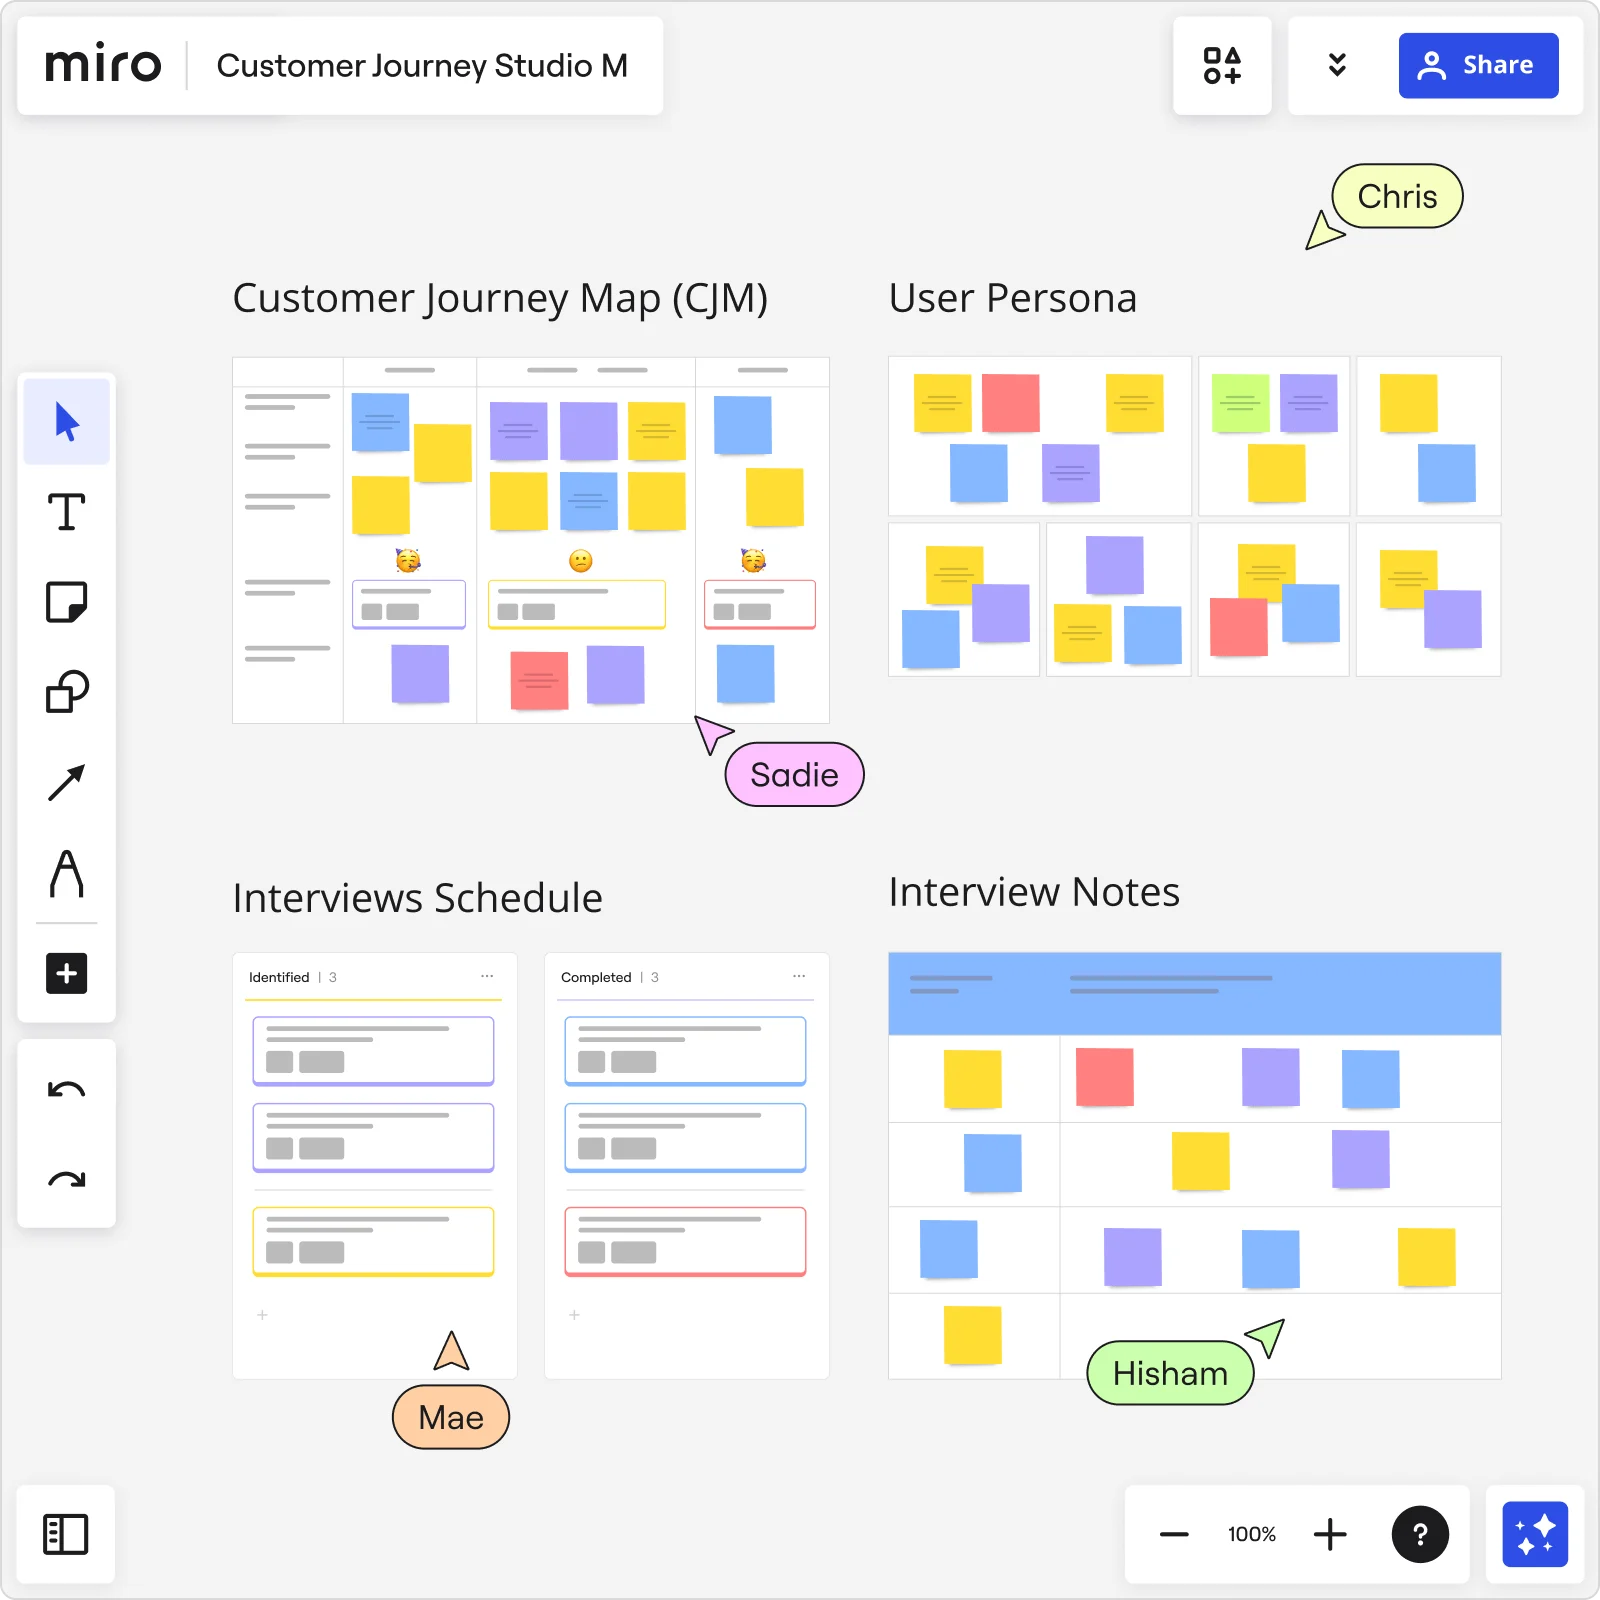 An image showing how to build a customer journey map in Miro